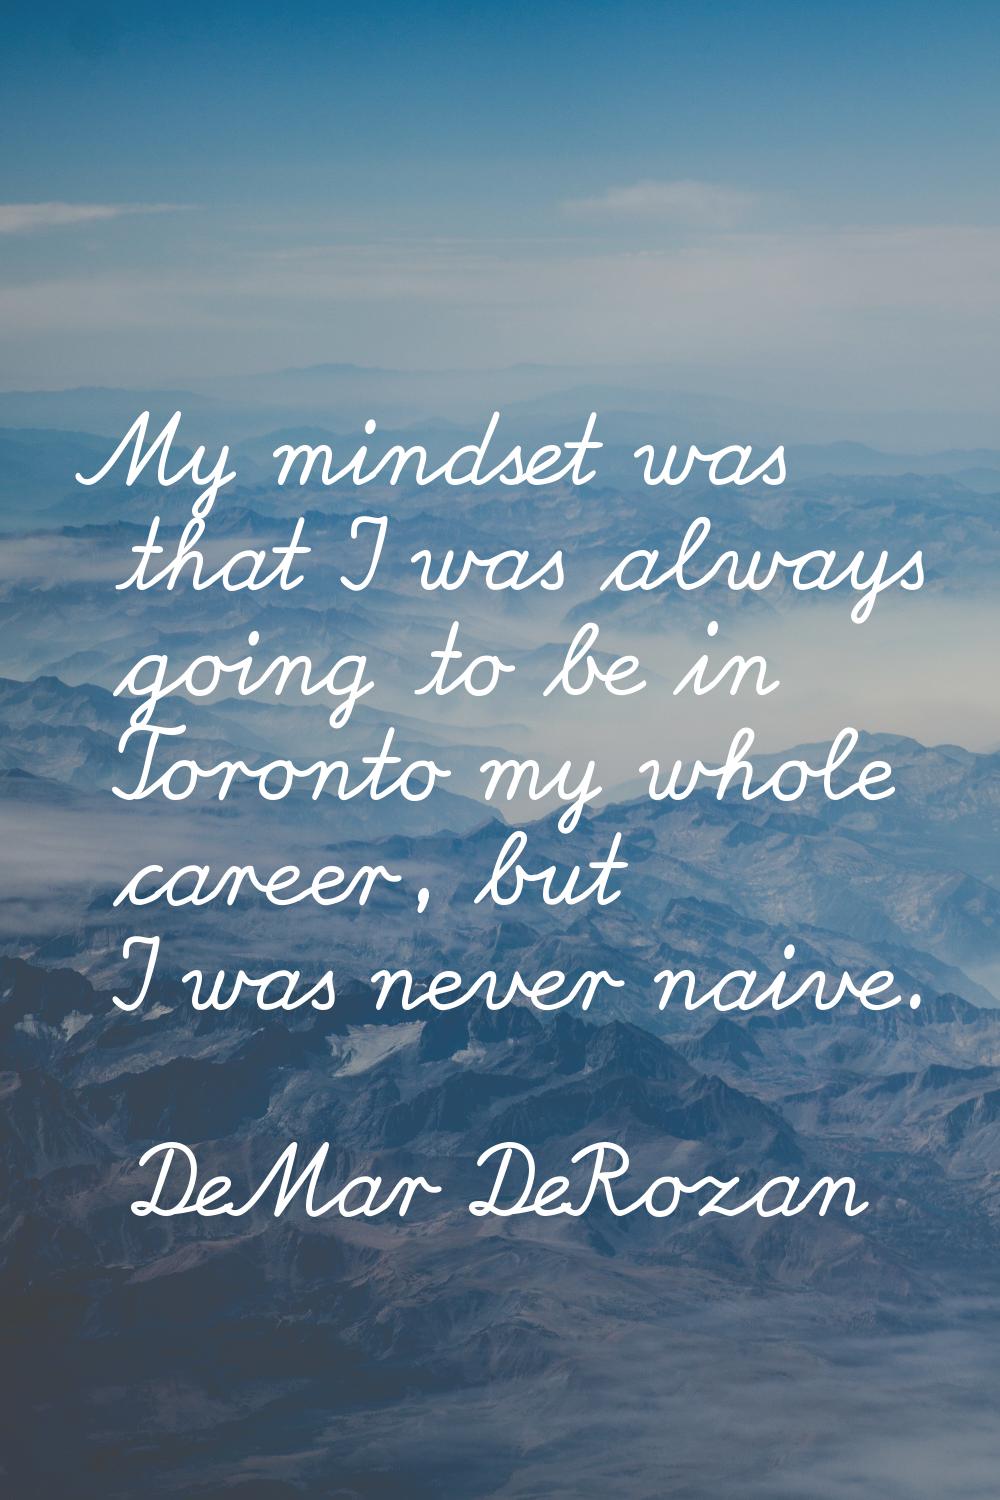 My mindset was that I was always going to be in Toronto my whole career, but I was never naive.